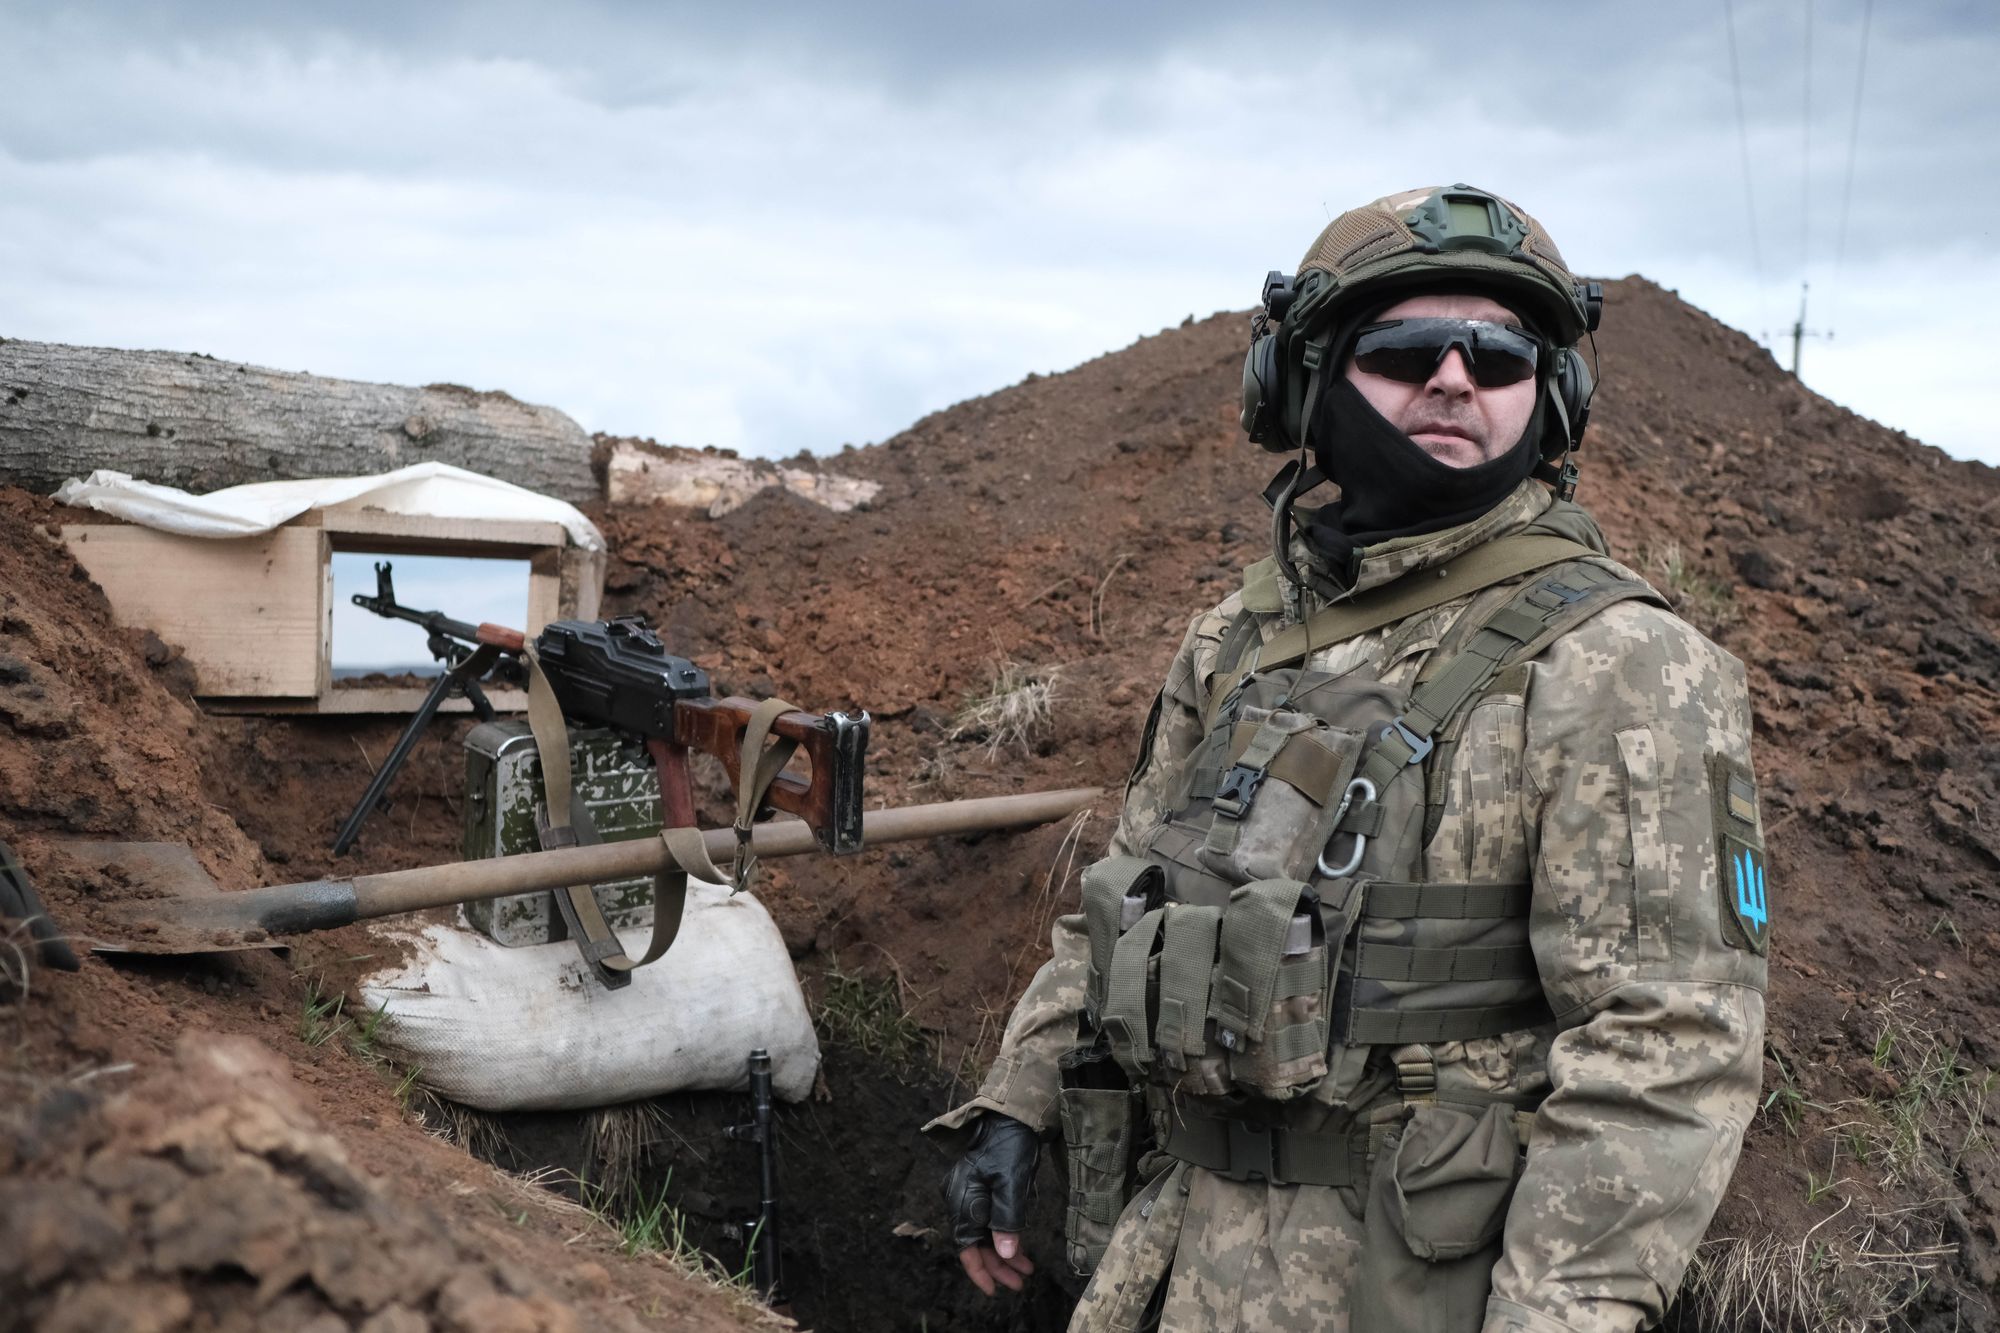 Trained in the heat of battle: The journey of Kharkiv Oblast’s Territorial Defense